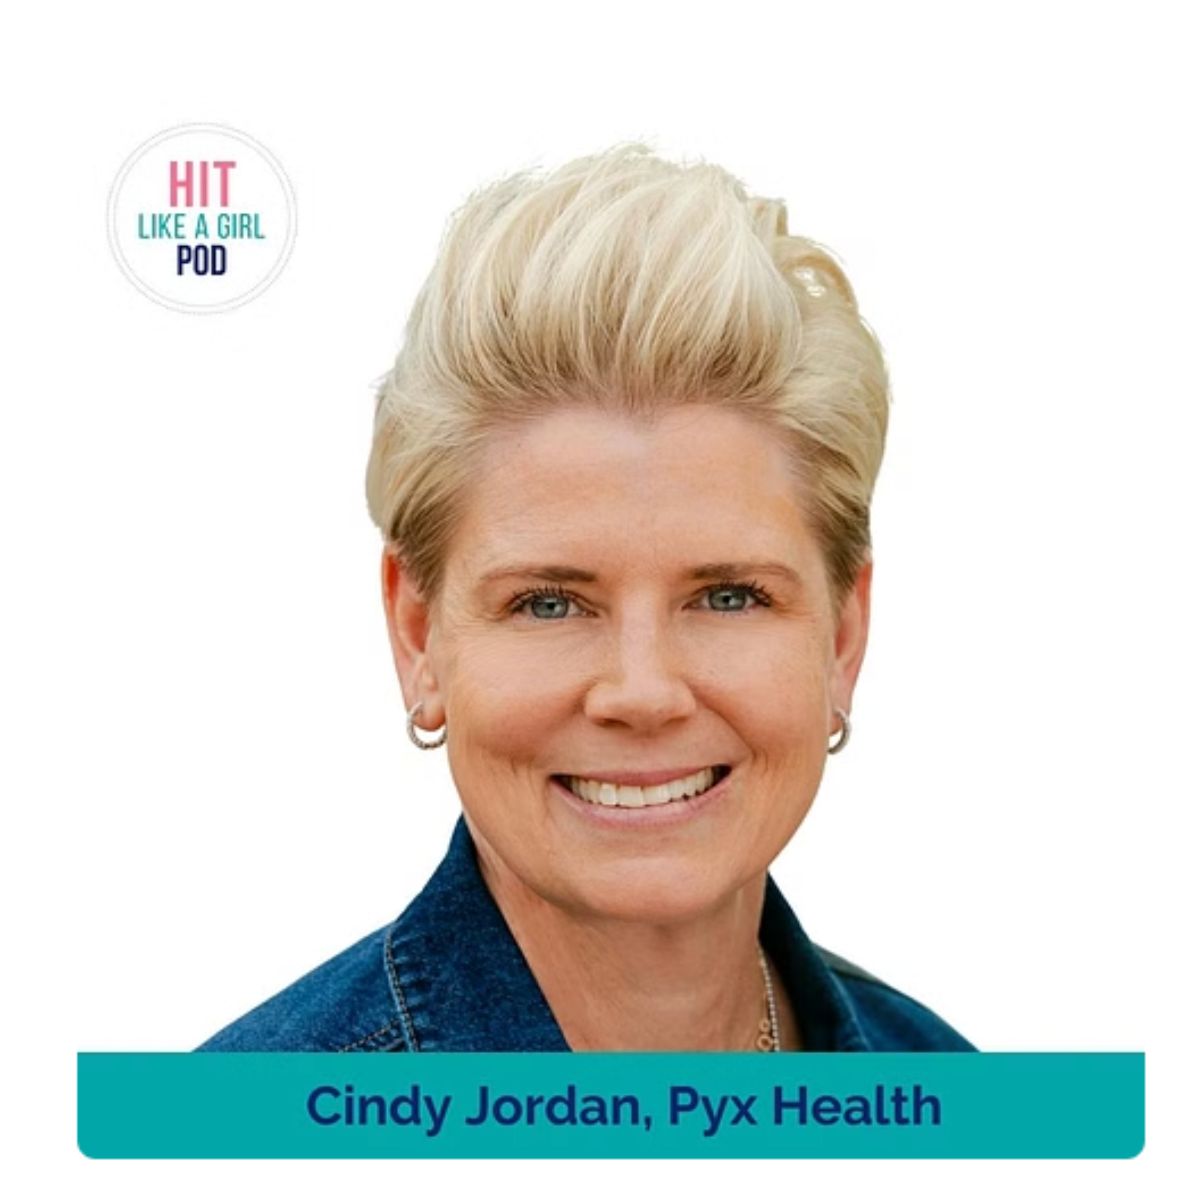 Episode Day! You're going to love this one! Today, Joy is joined by Cindy Jordan, co-founder and CEO of @PyxHealth. Cindy shares her personal journey and the inspiration behind Pyx Health's mission to combat loneliness. buff.ly/49XY2ar #mentalhealth #HITlikeagirl